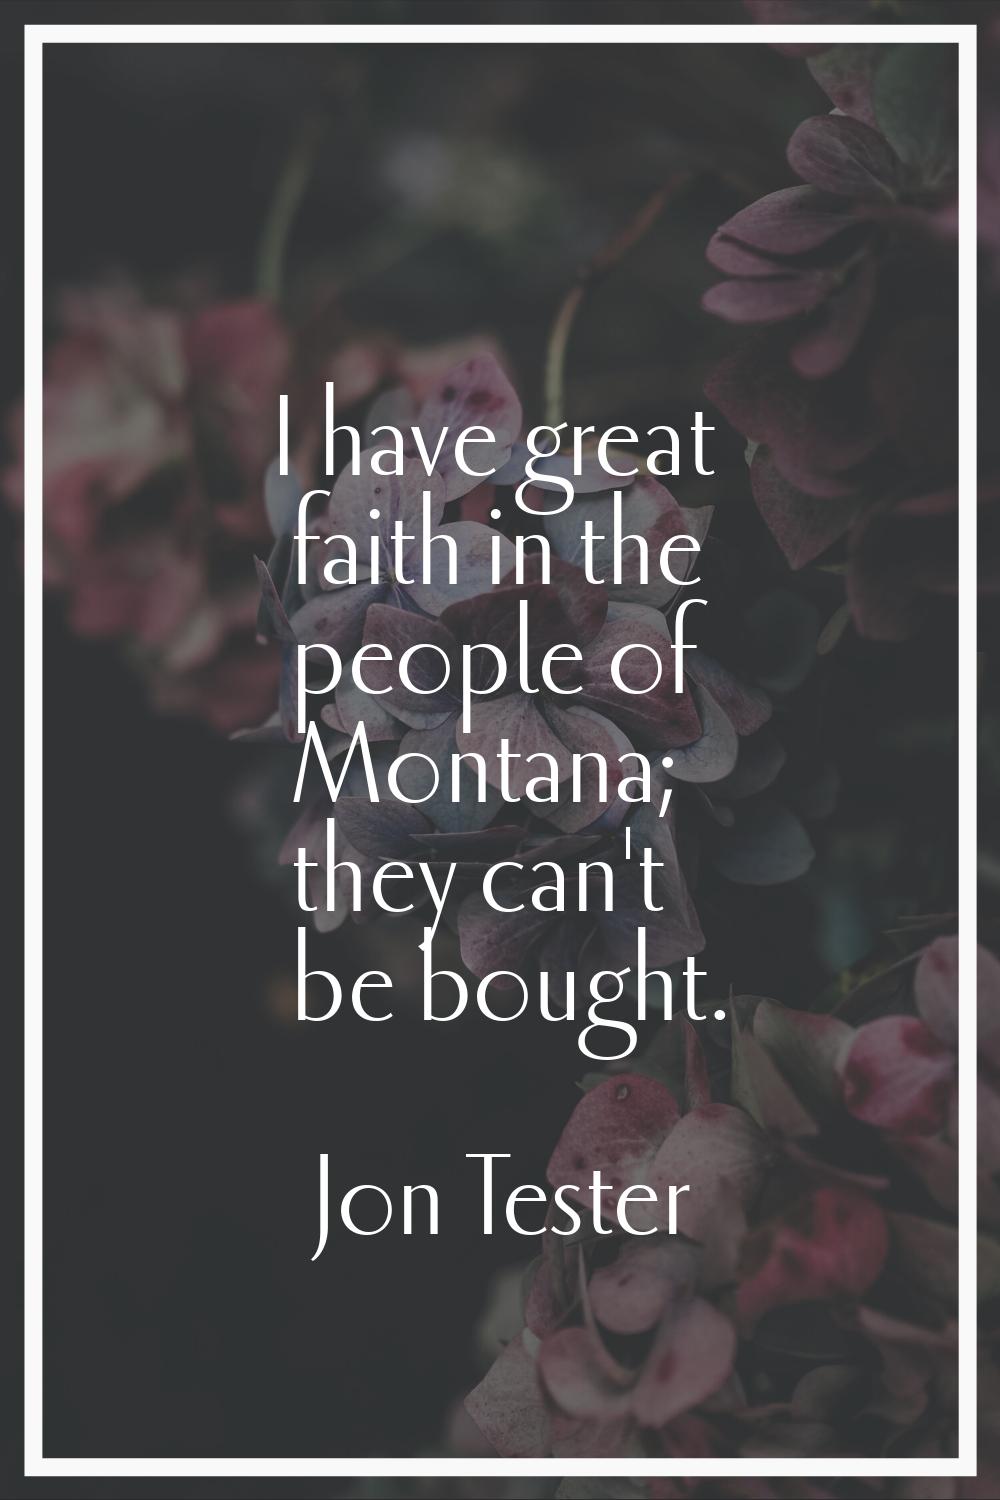 I have great faith in the people of Montana; they can't be bought.